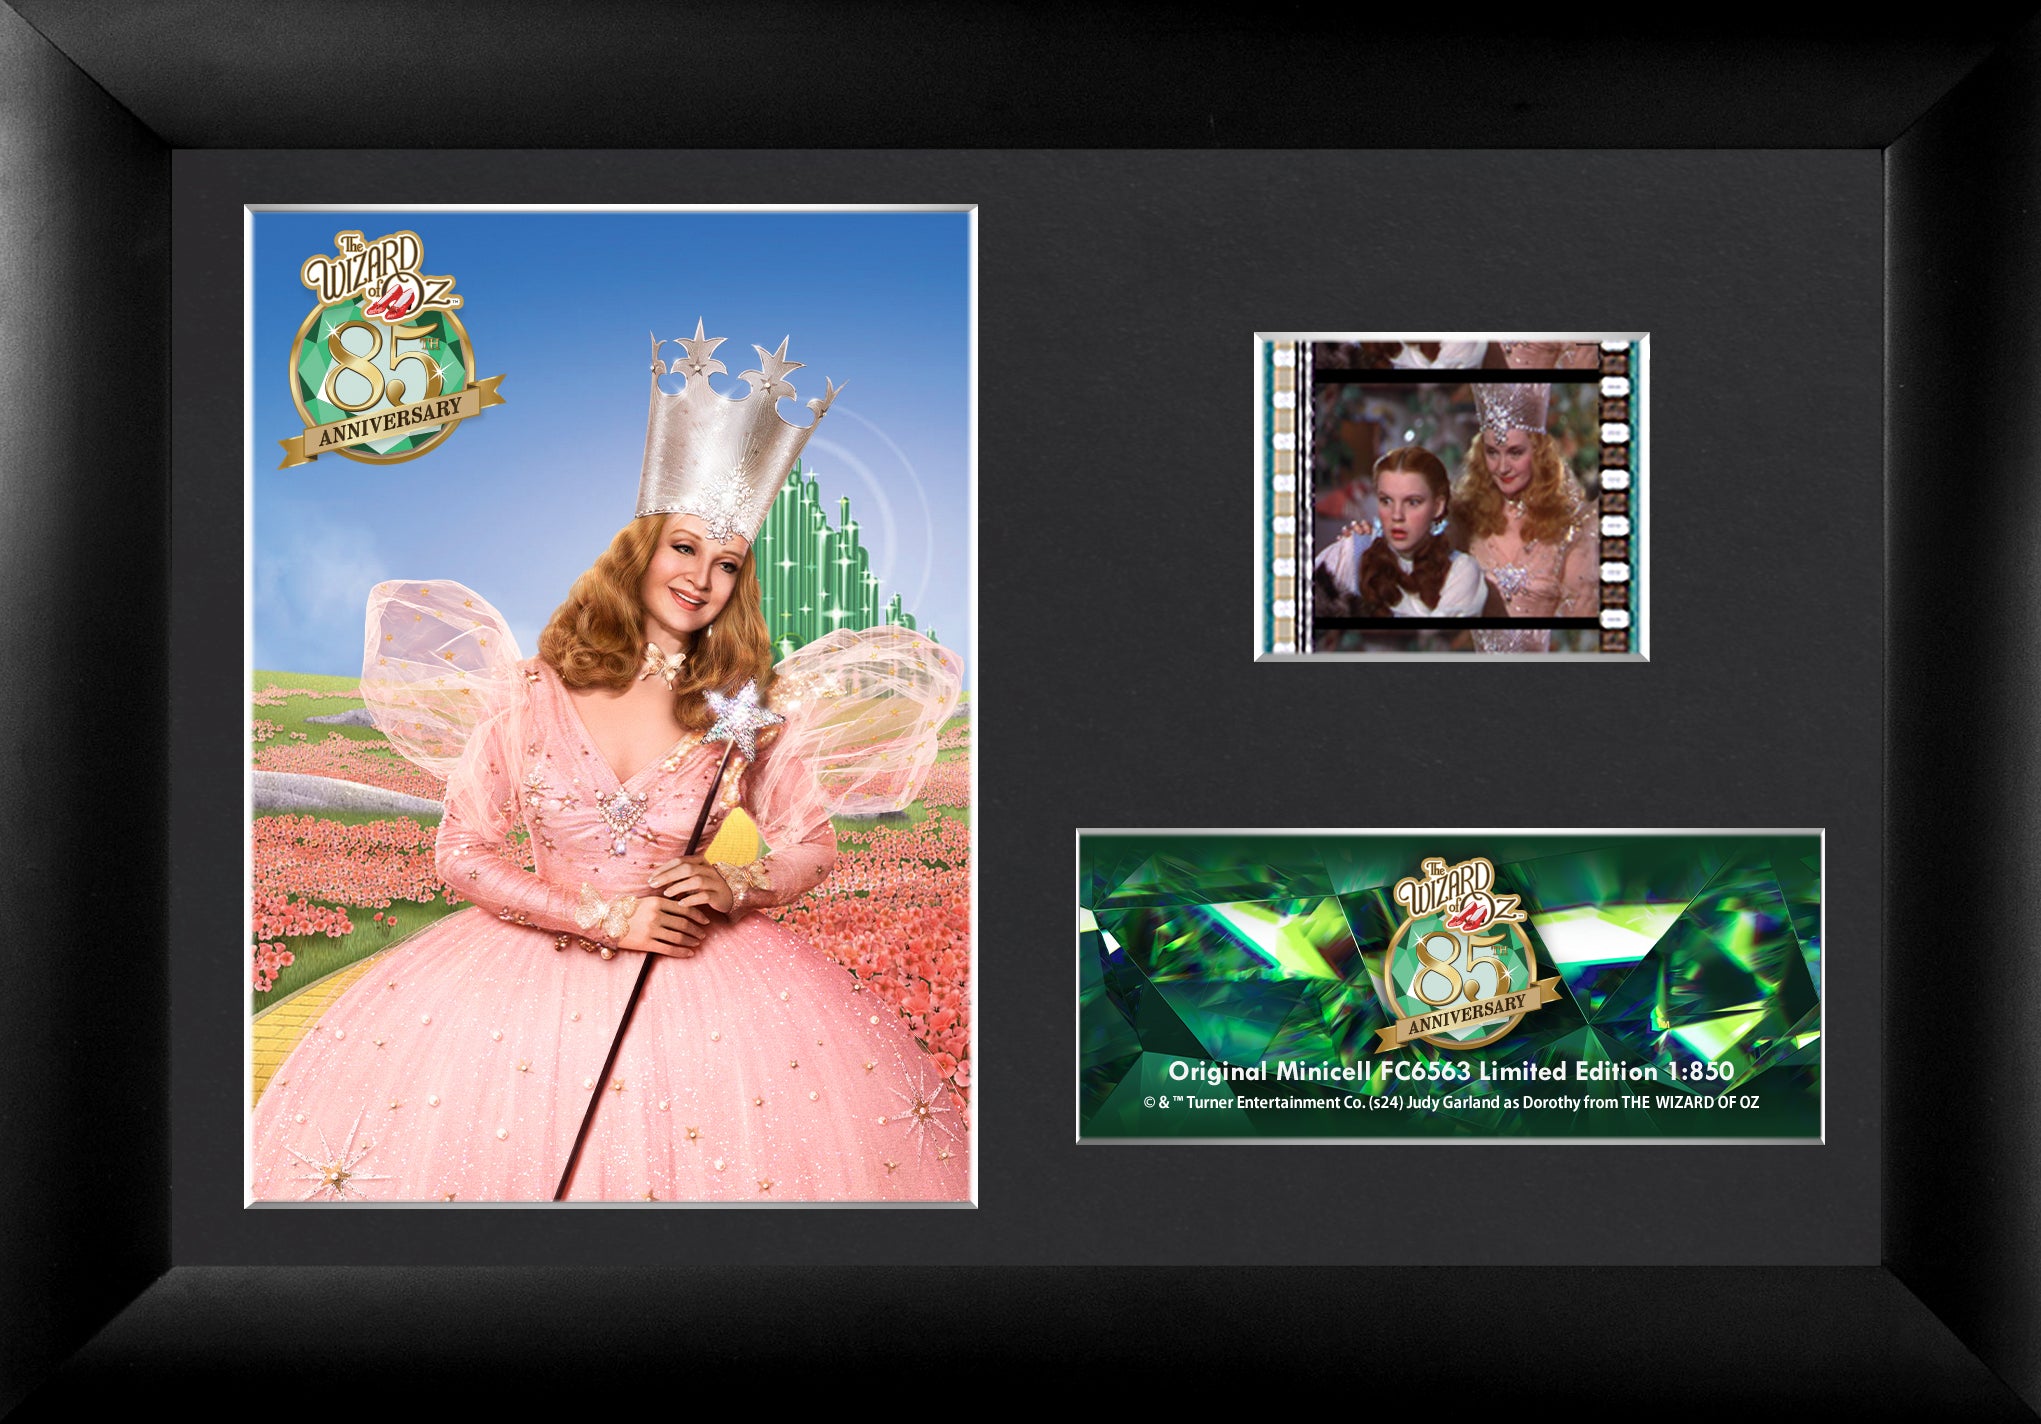 The Wizard of Oz (85th Anniversary – Glinda the Good Witch) Minicell FilmCells Framed Desktop Presentation USFC6563